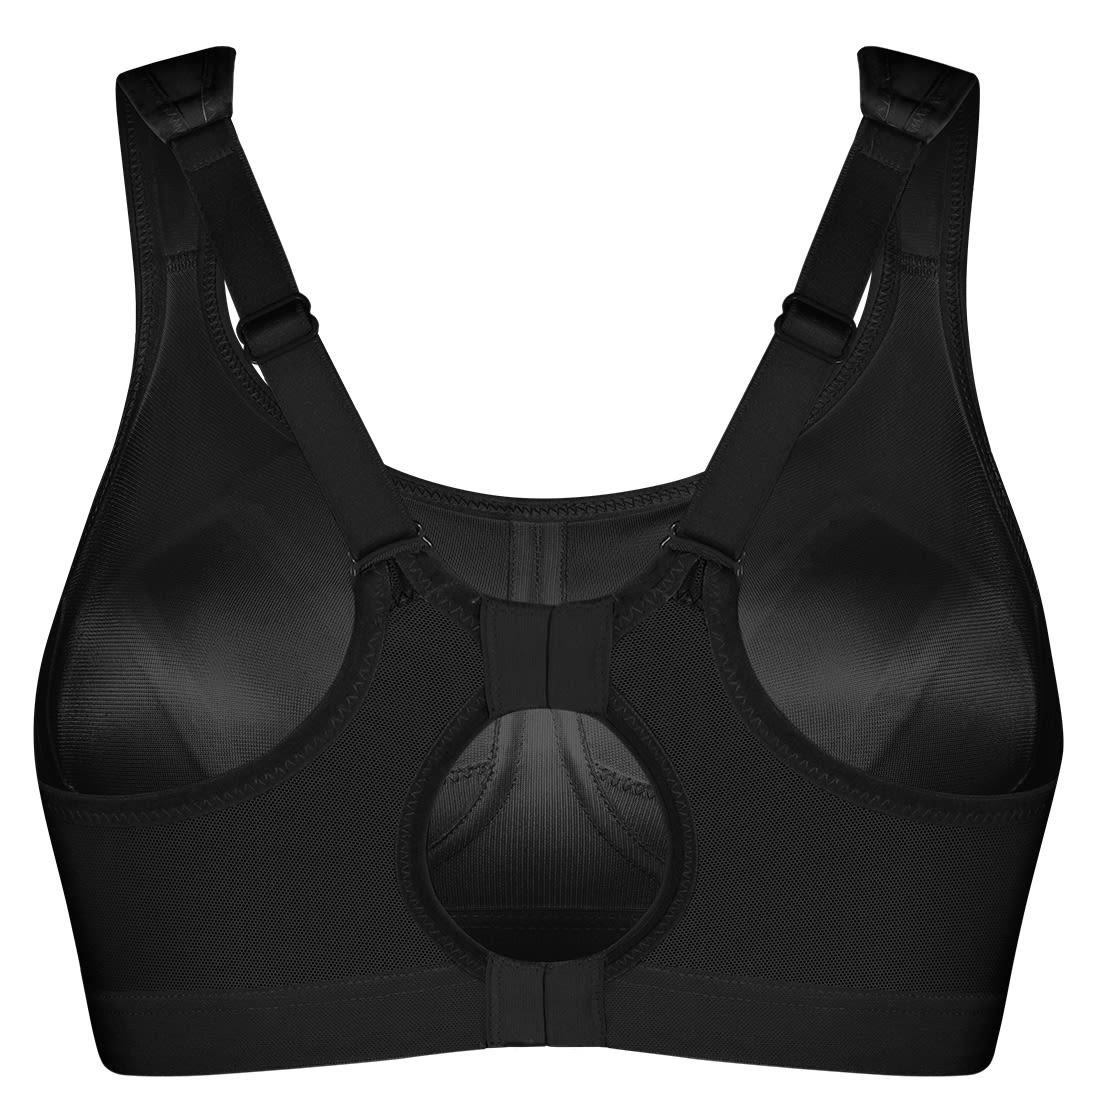 Sports bra, non wired, removable padded, infinity collection, ysabel mora.